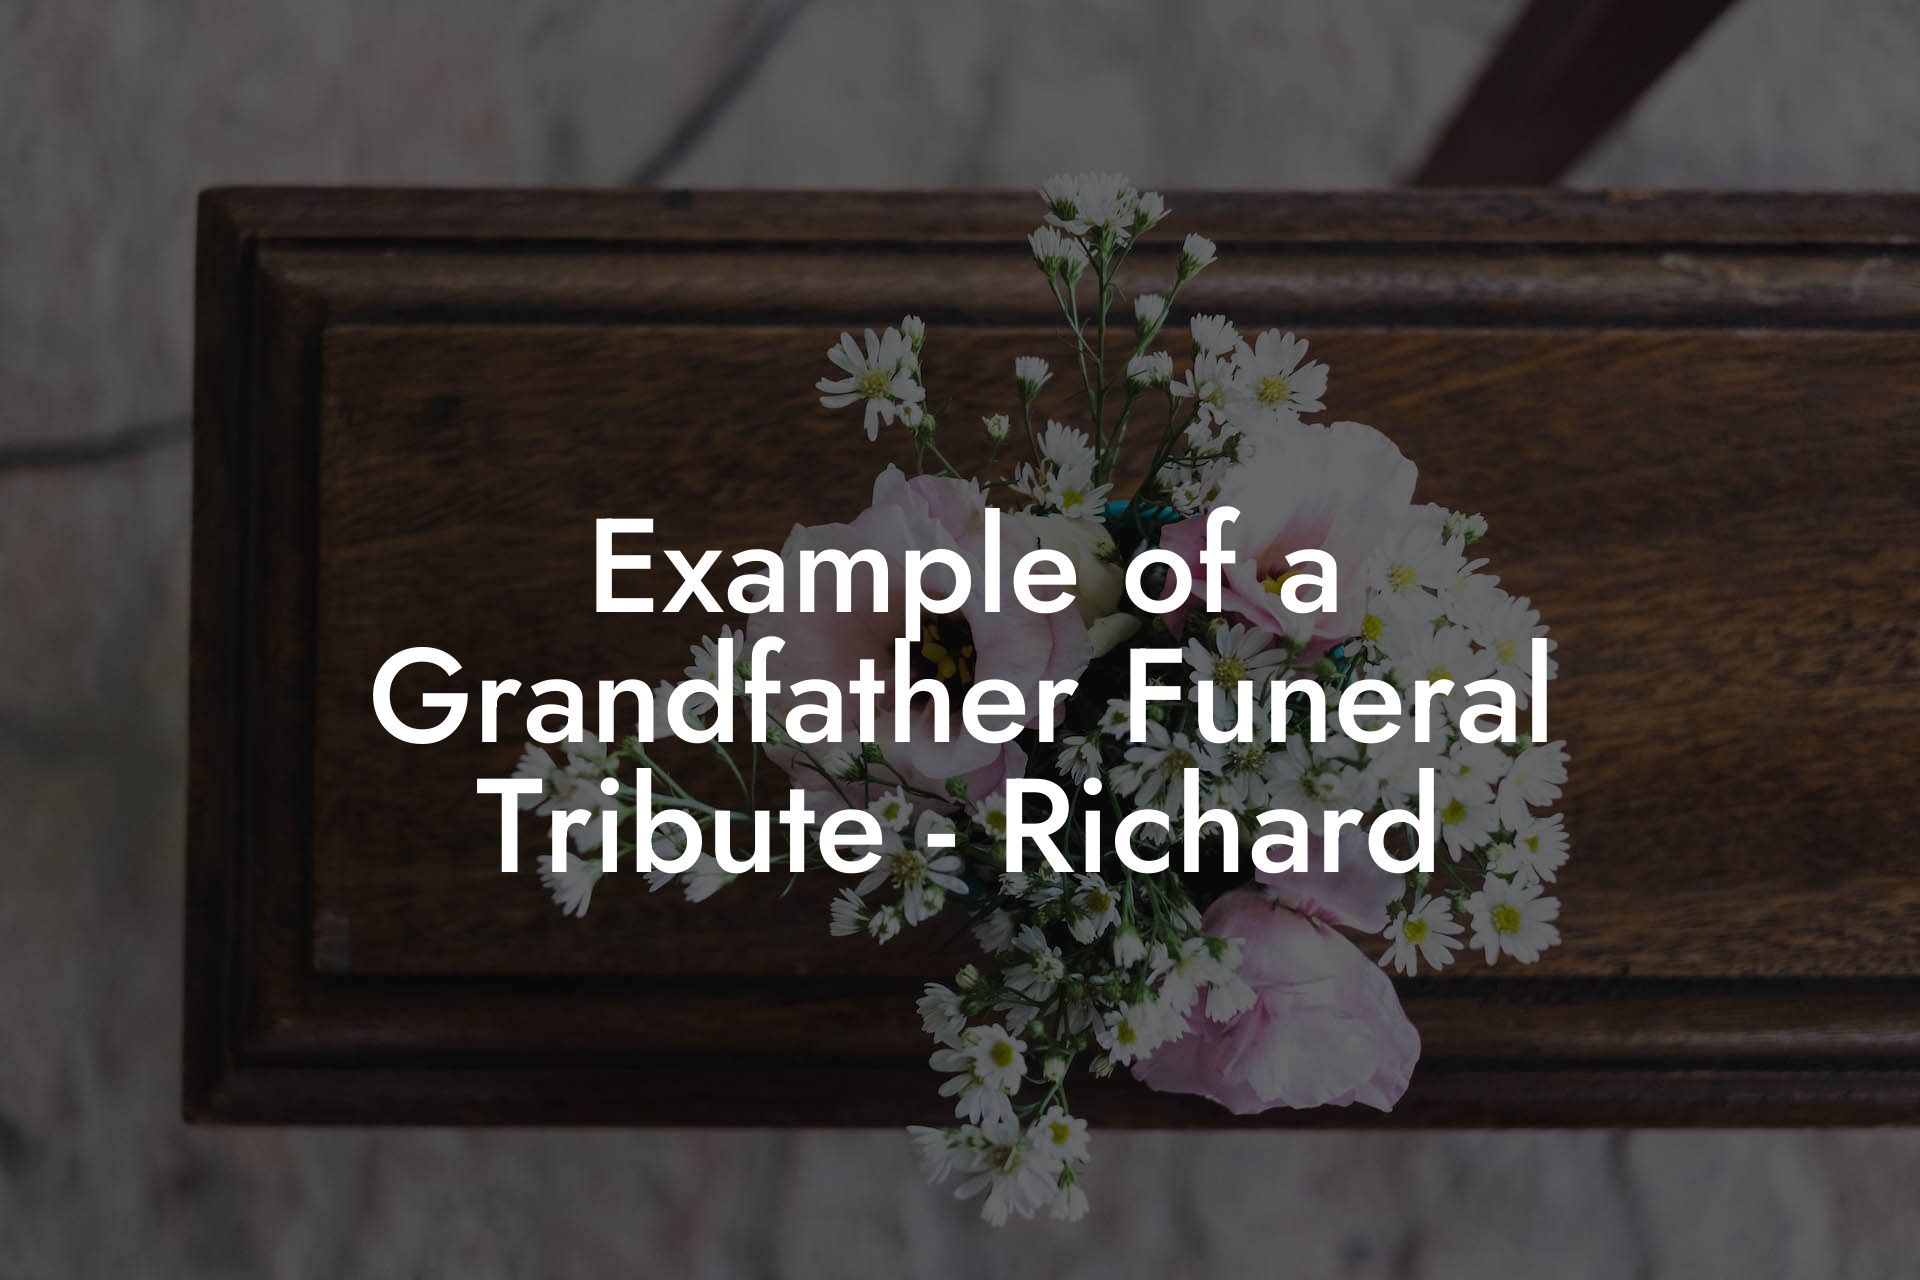 Example of a Grandfather Funeral Tribute - Richard